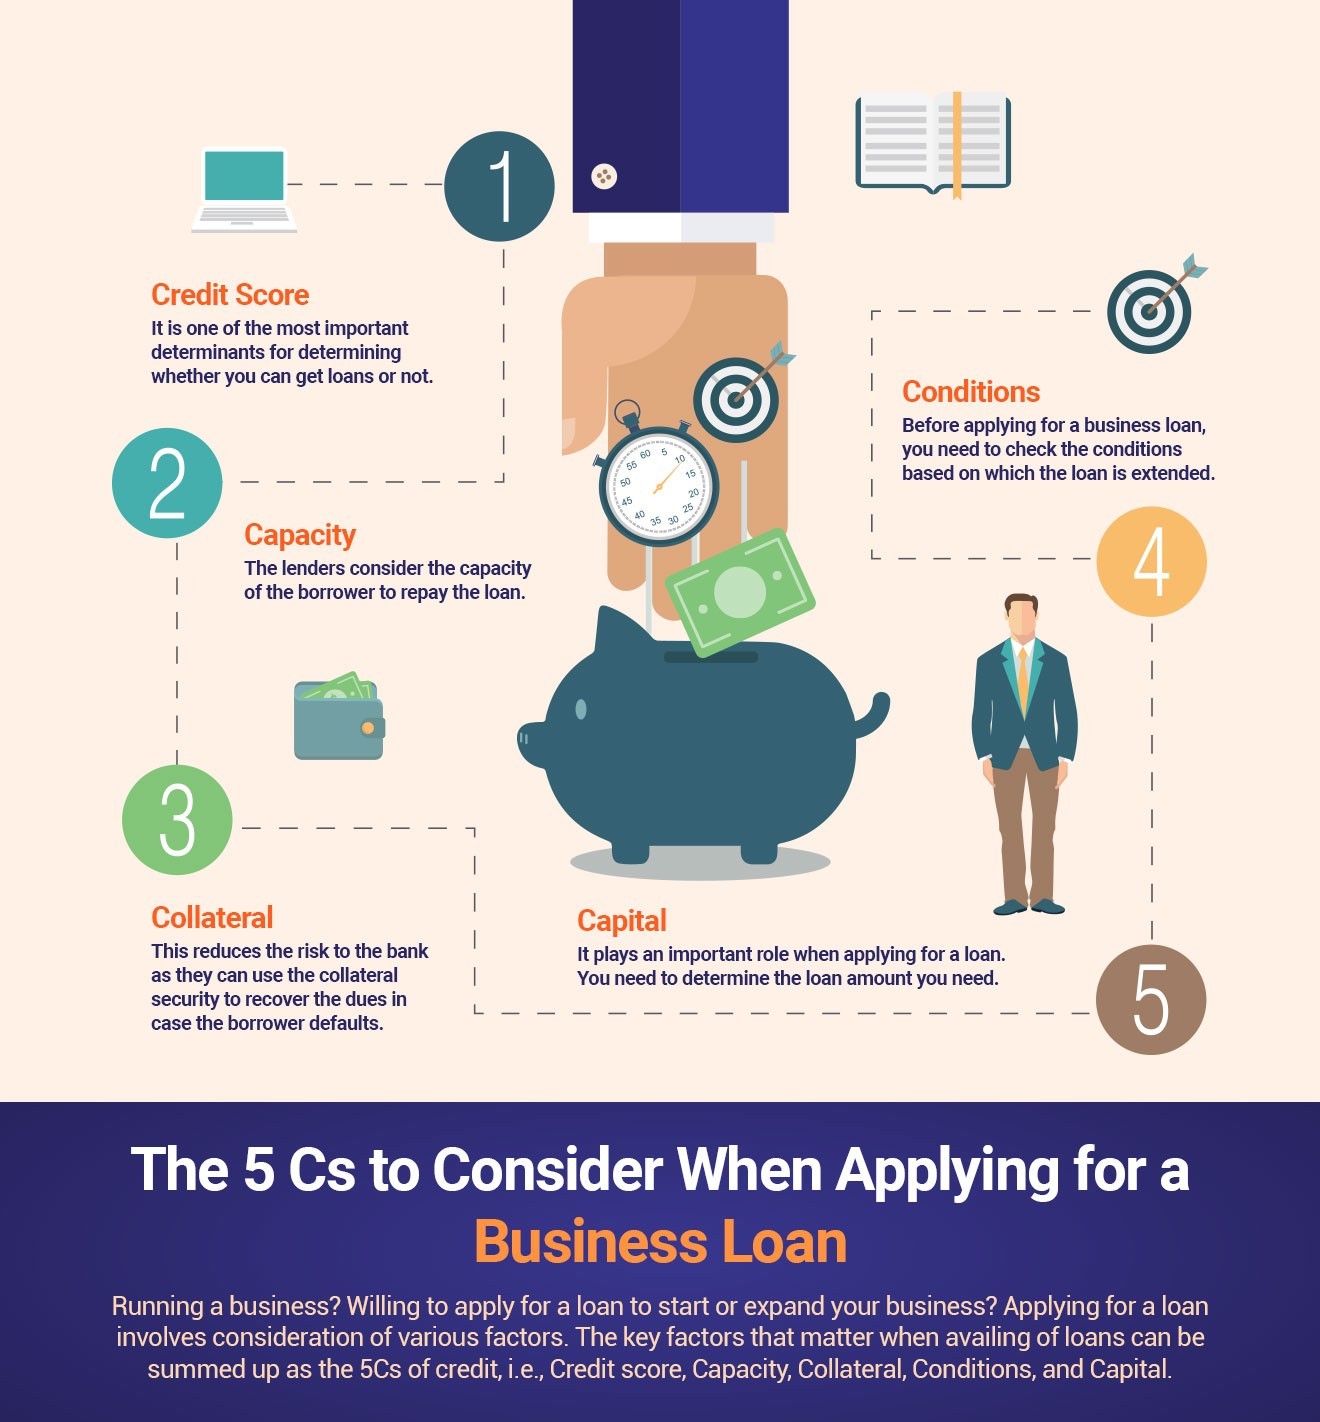 The 5 Cs to Consider When Applying for a Business Loan